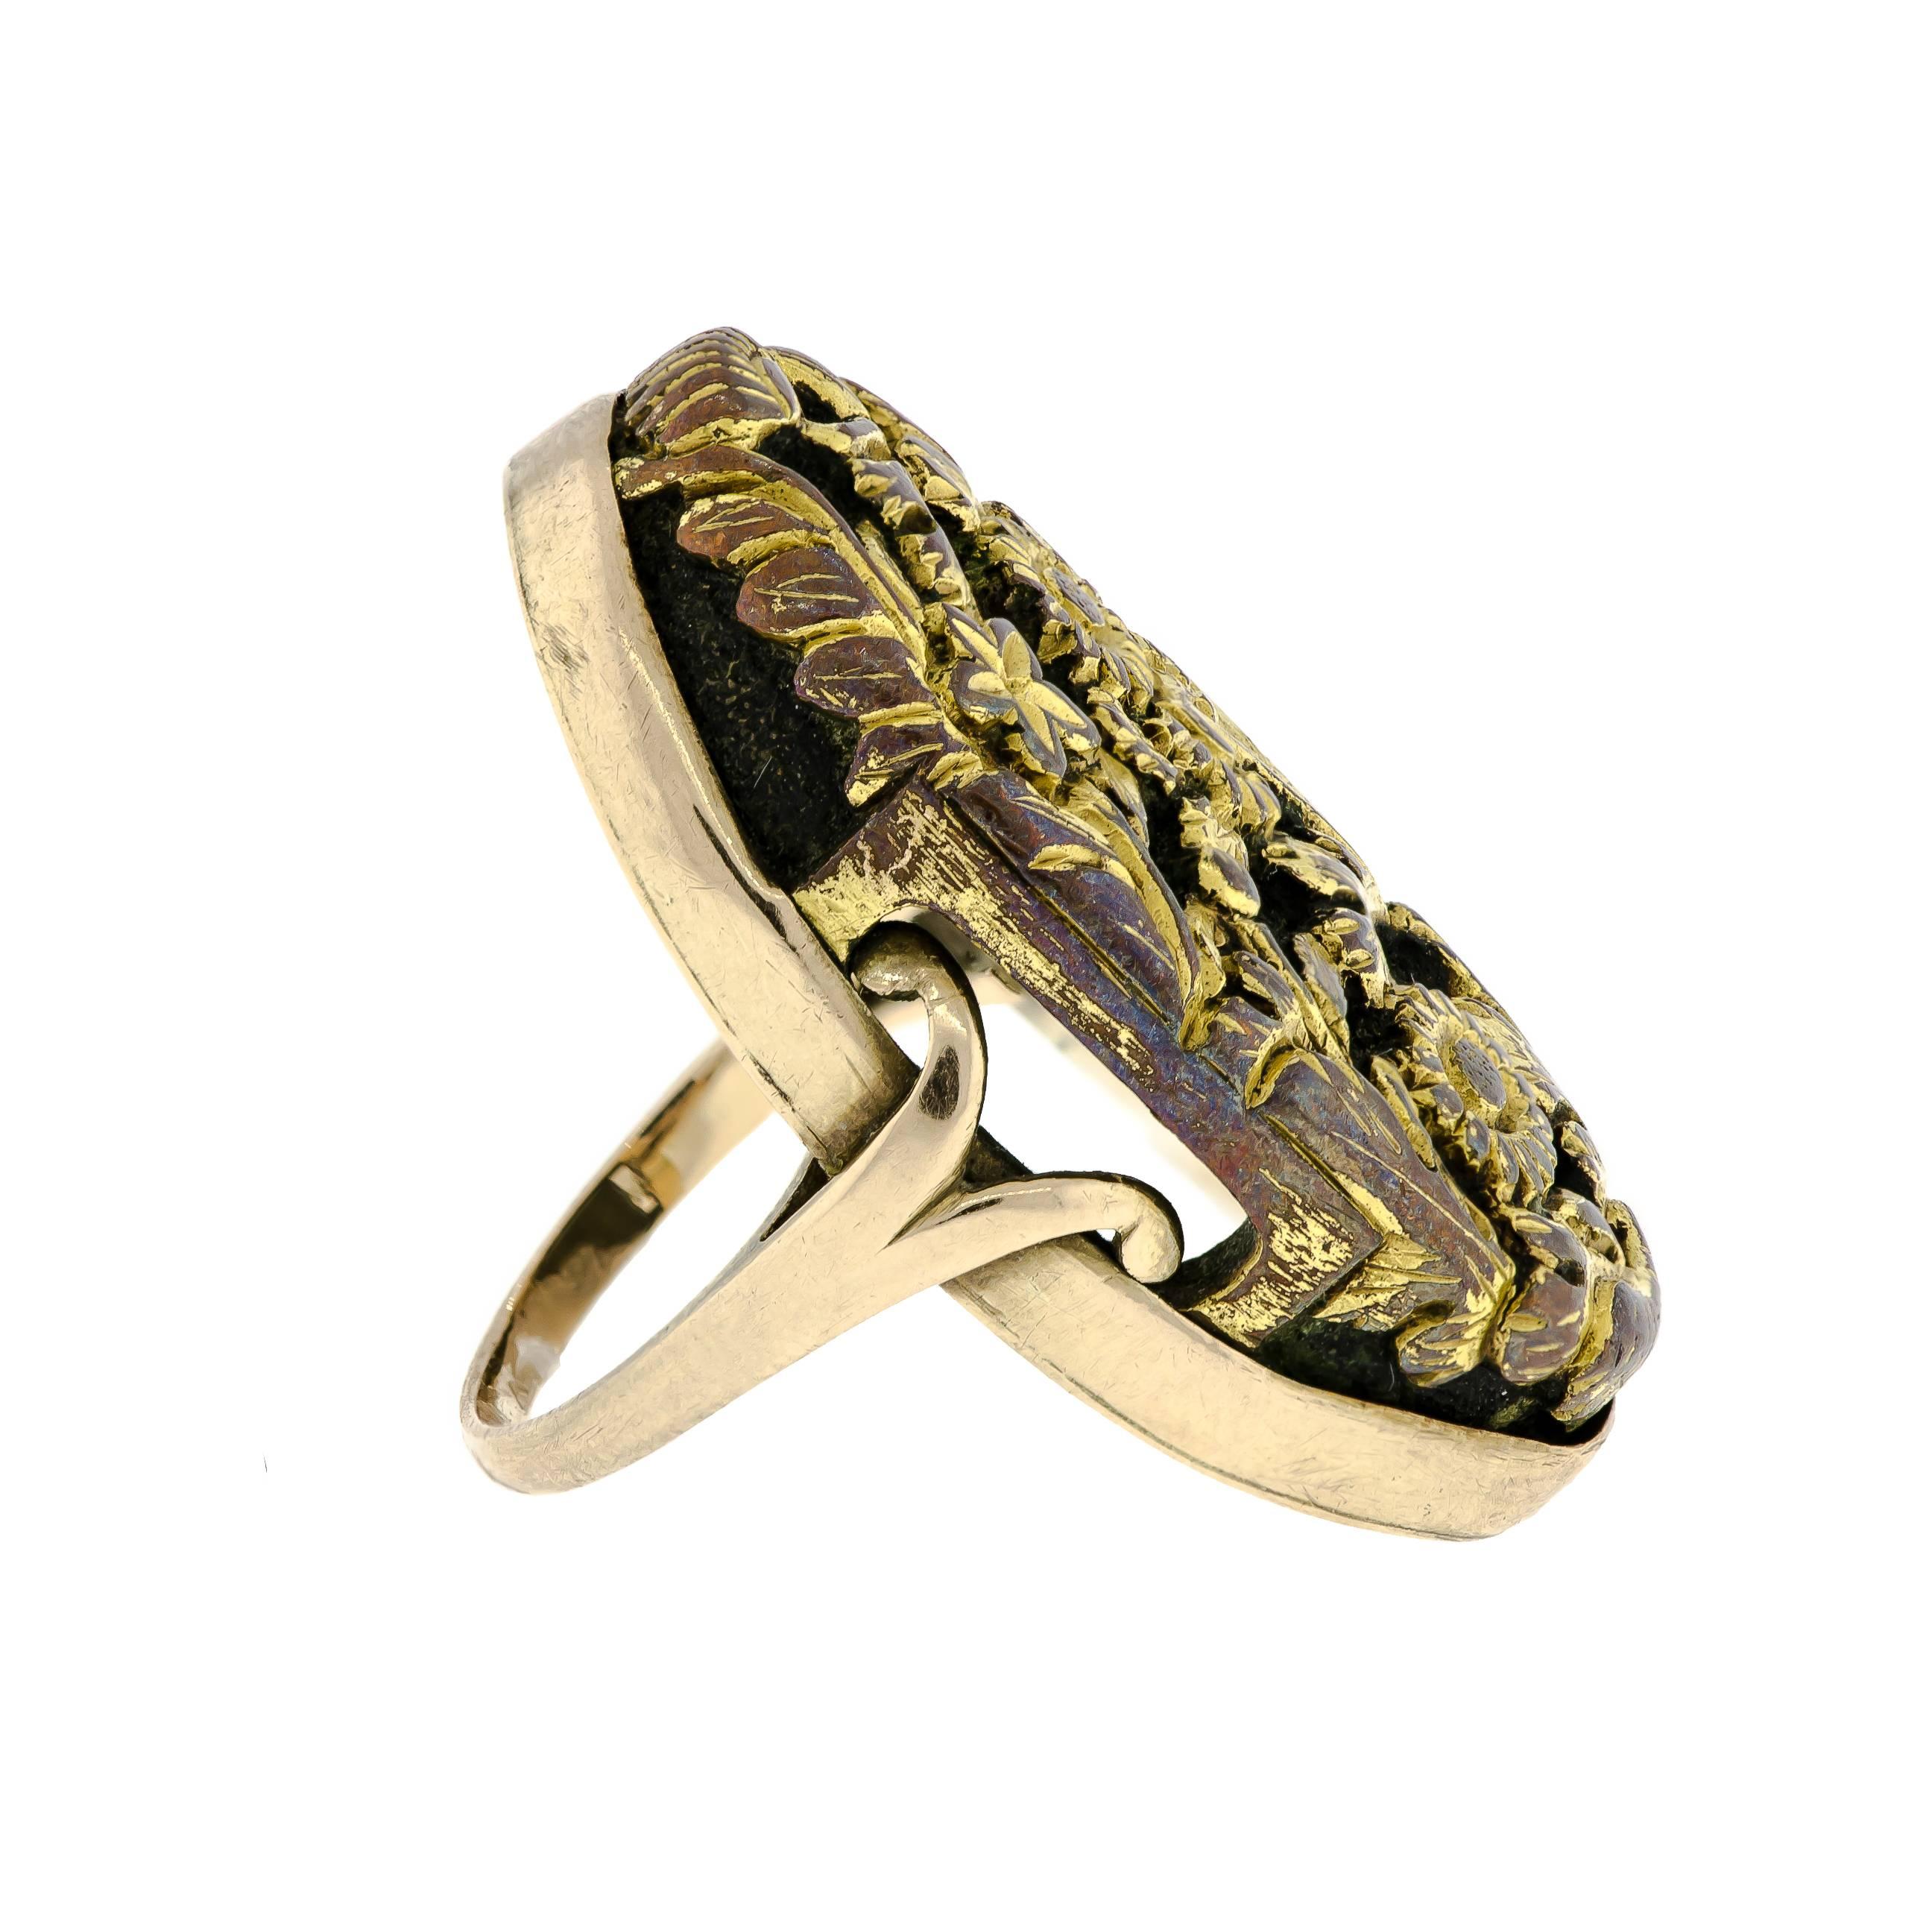 Antique Shakudo mixed metal ring with an elaborate floral pattern set in a yellow gold mount